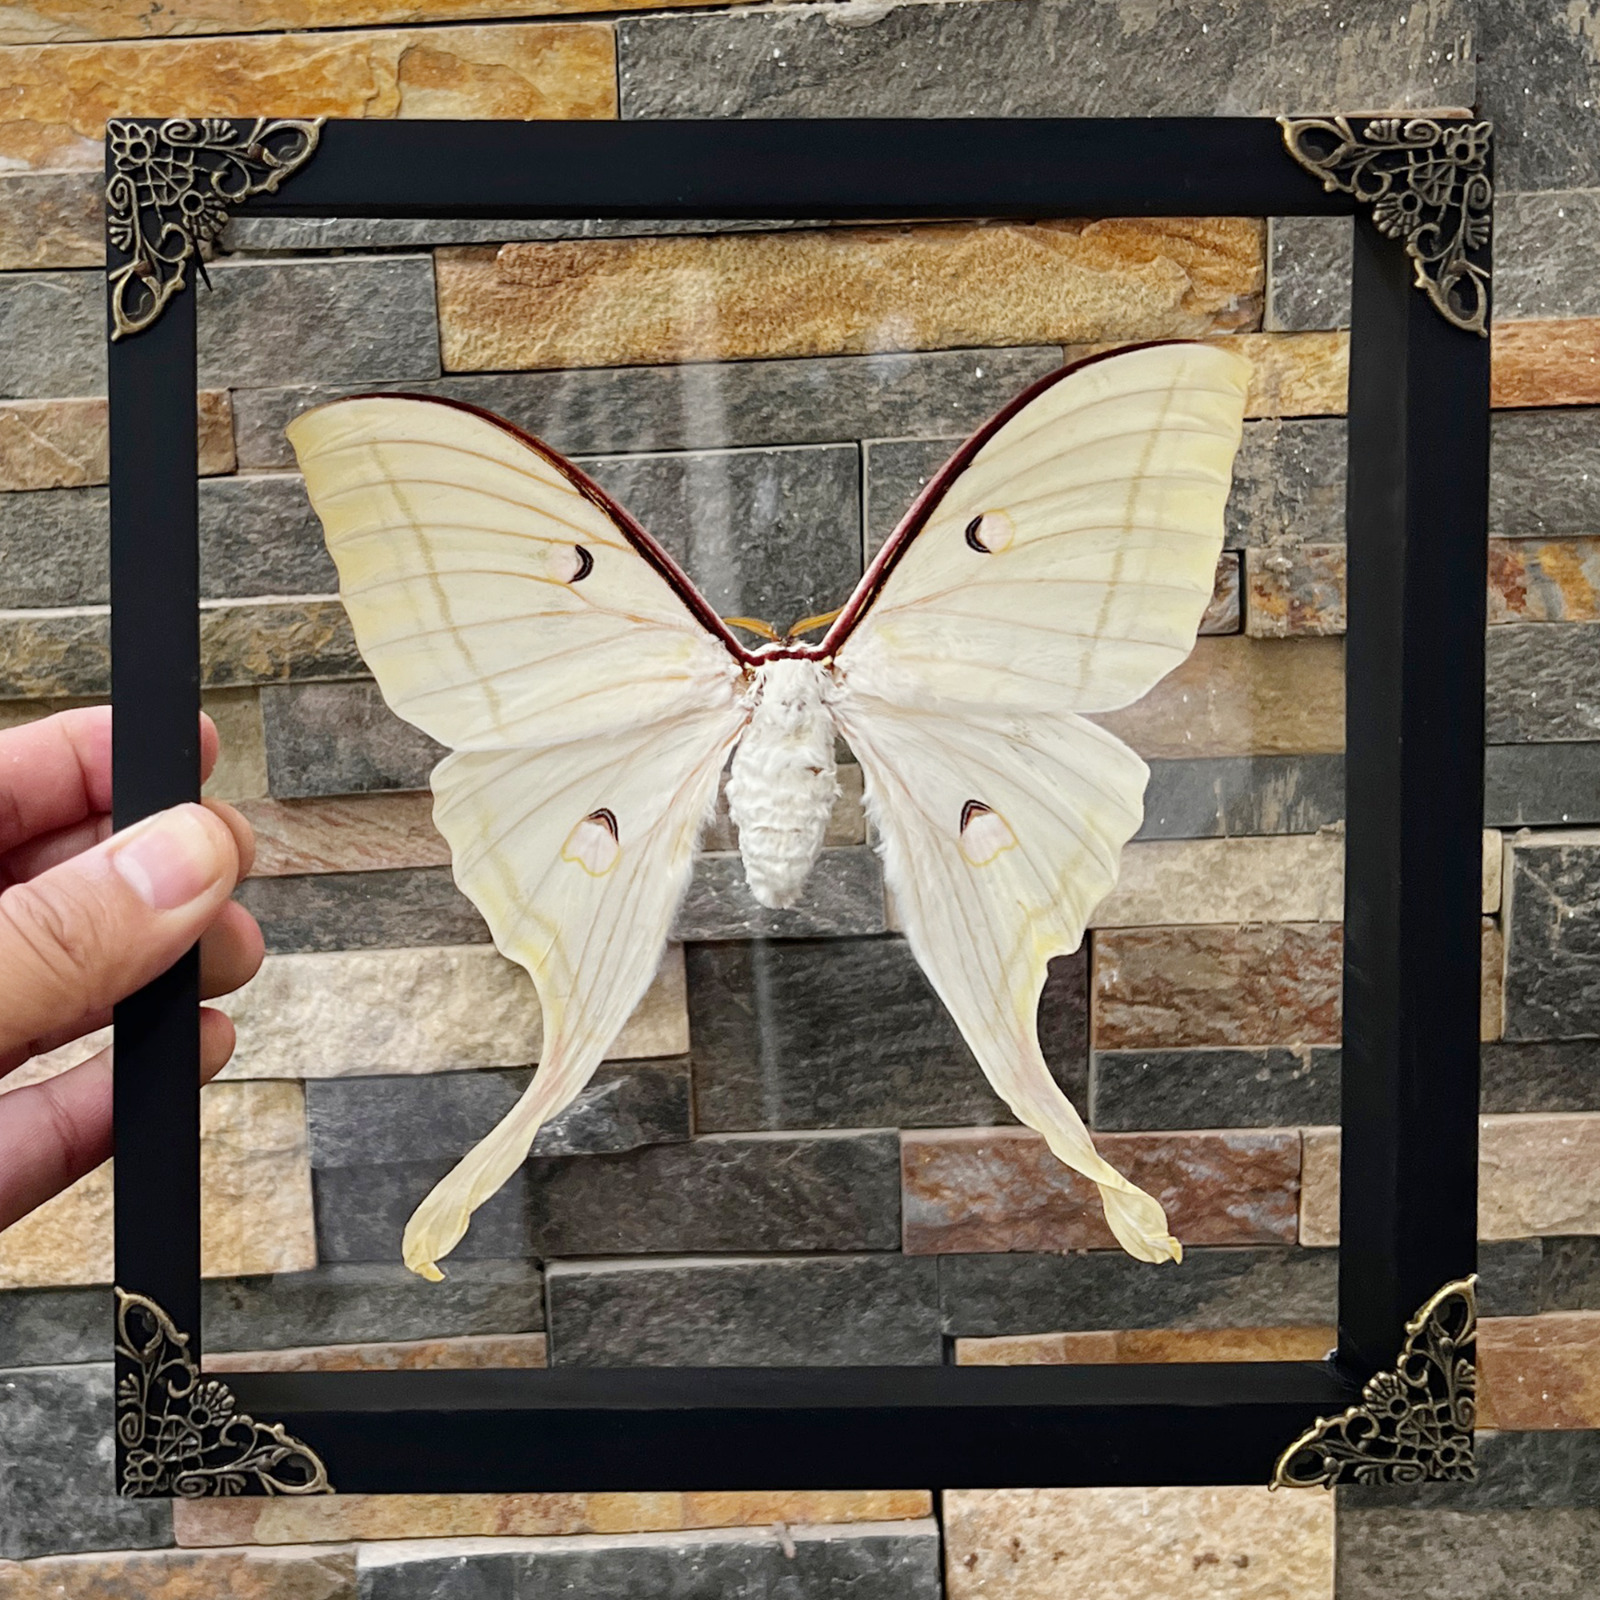 Real Luna Moth Framed Taxidermy Insect Curiosities and Oddities Wall Art Decor